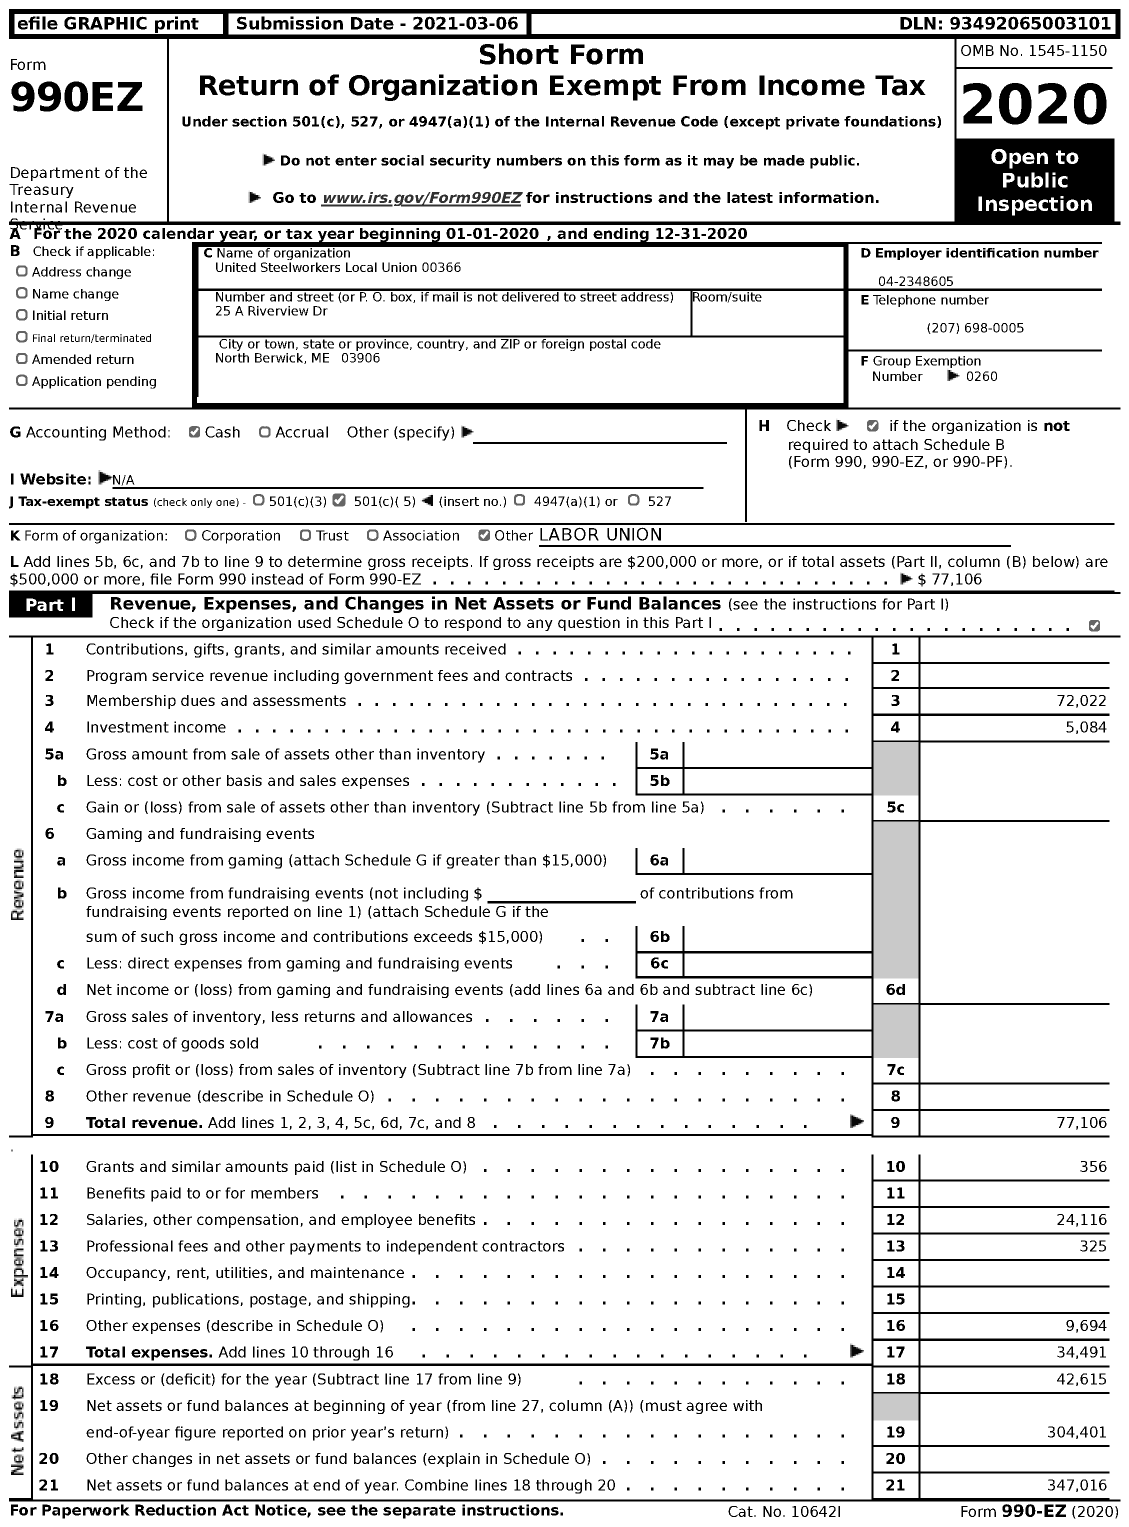 Image of first page of 2020 Form 990EZ for UNITED Steelworkers - 00366 Local